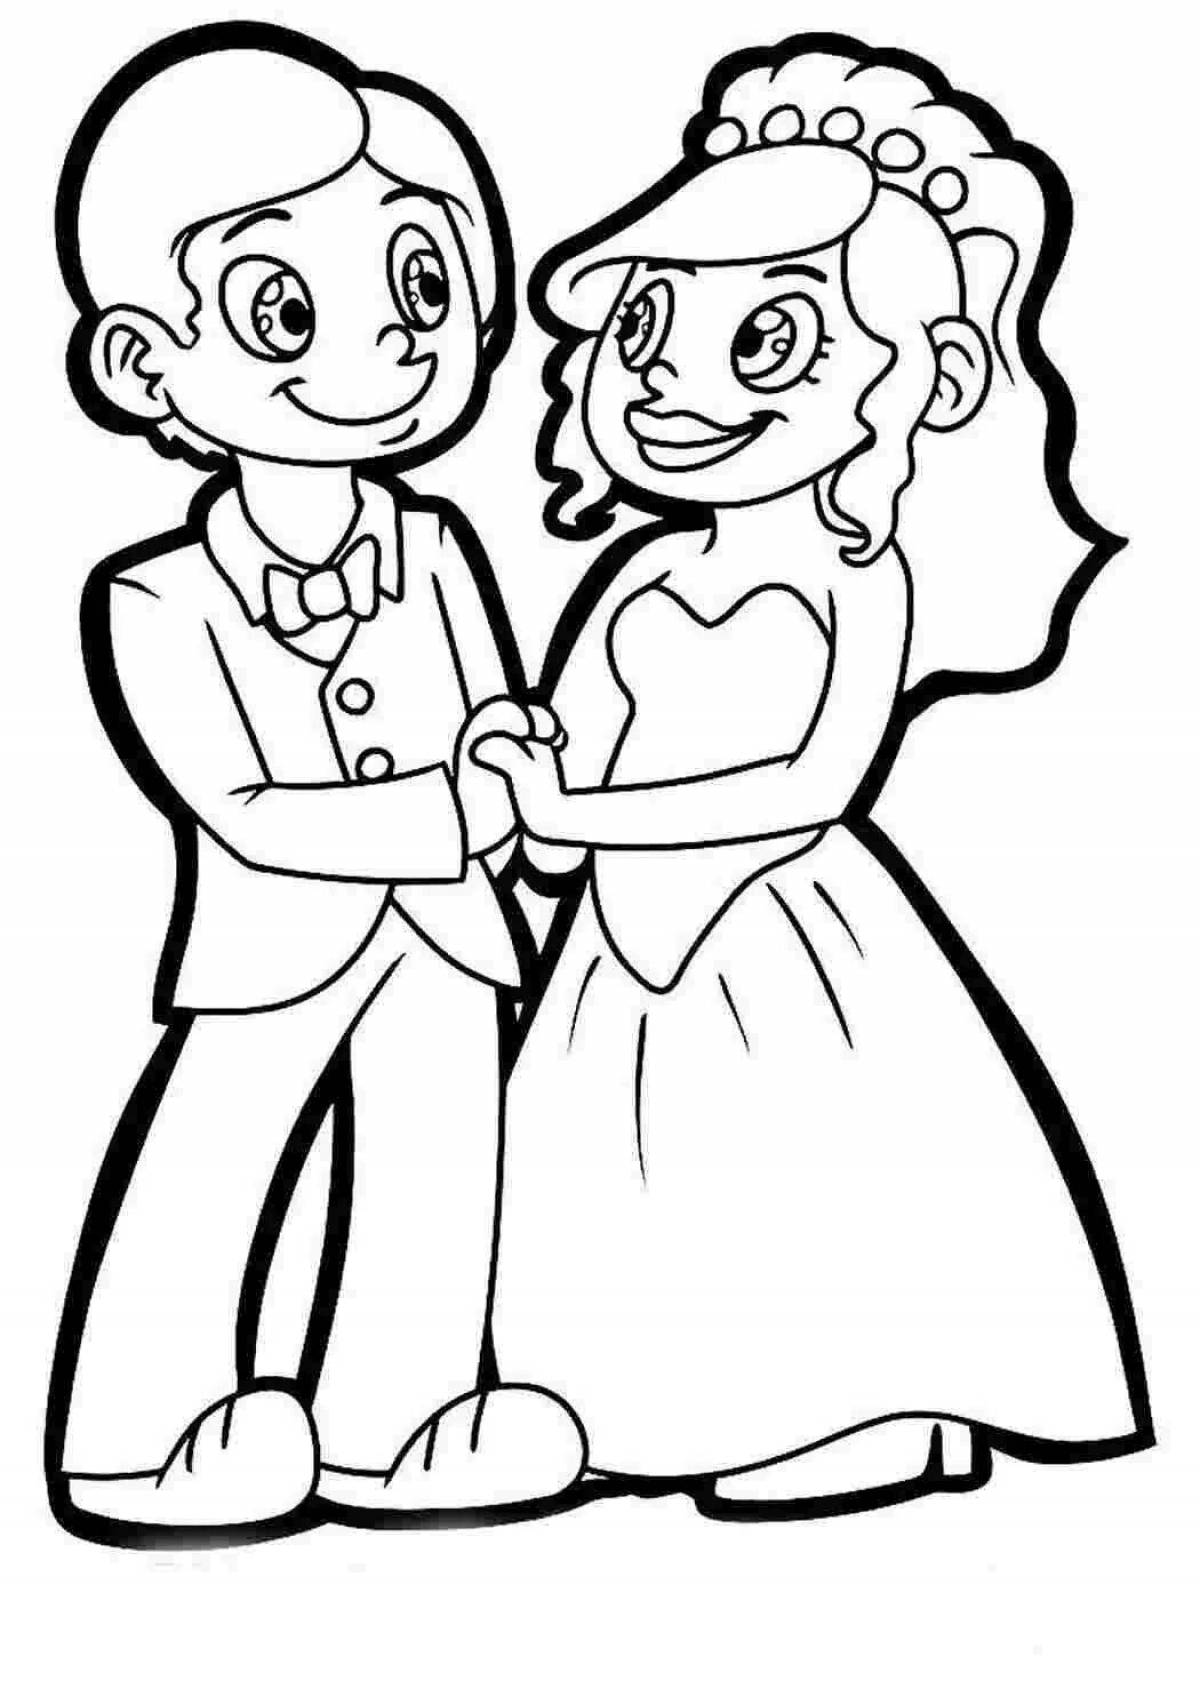 Colorful bride and groom coloring page